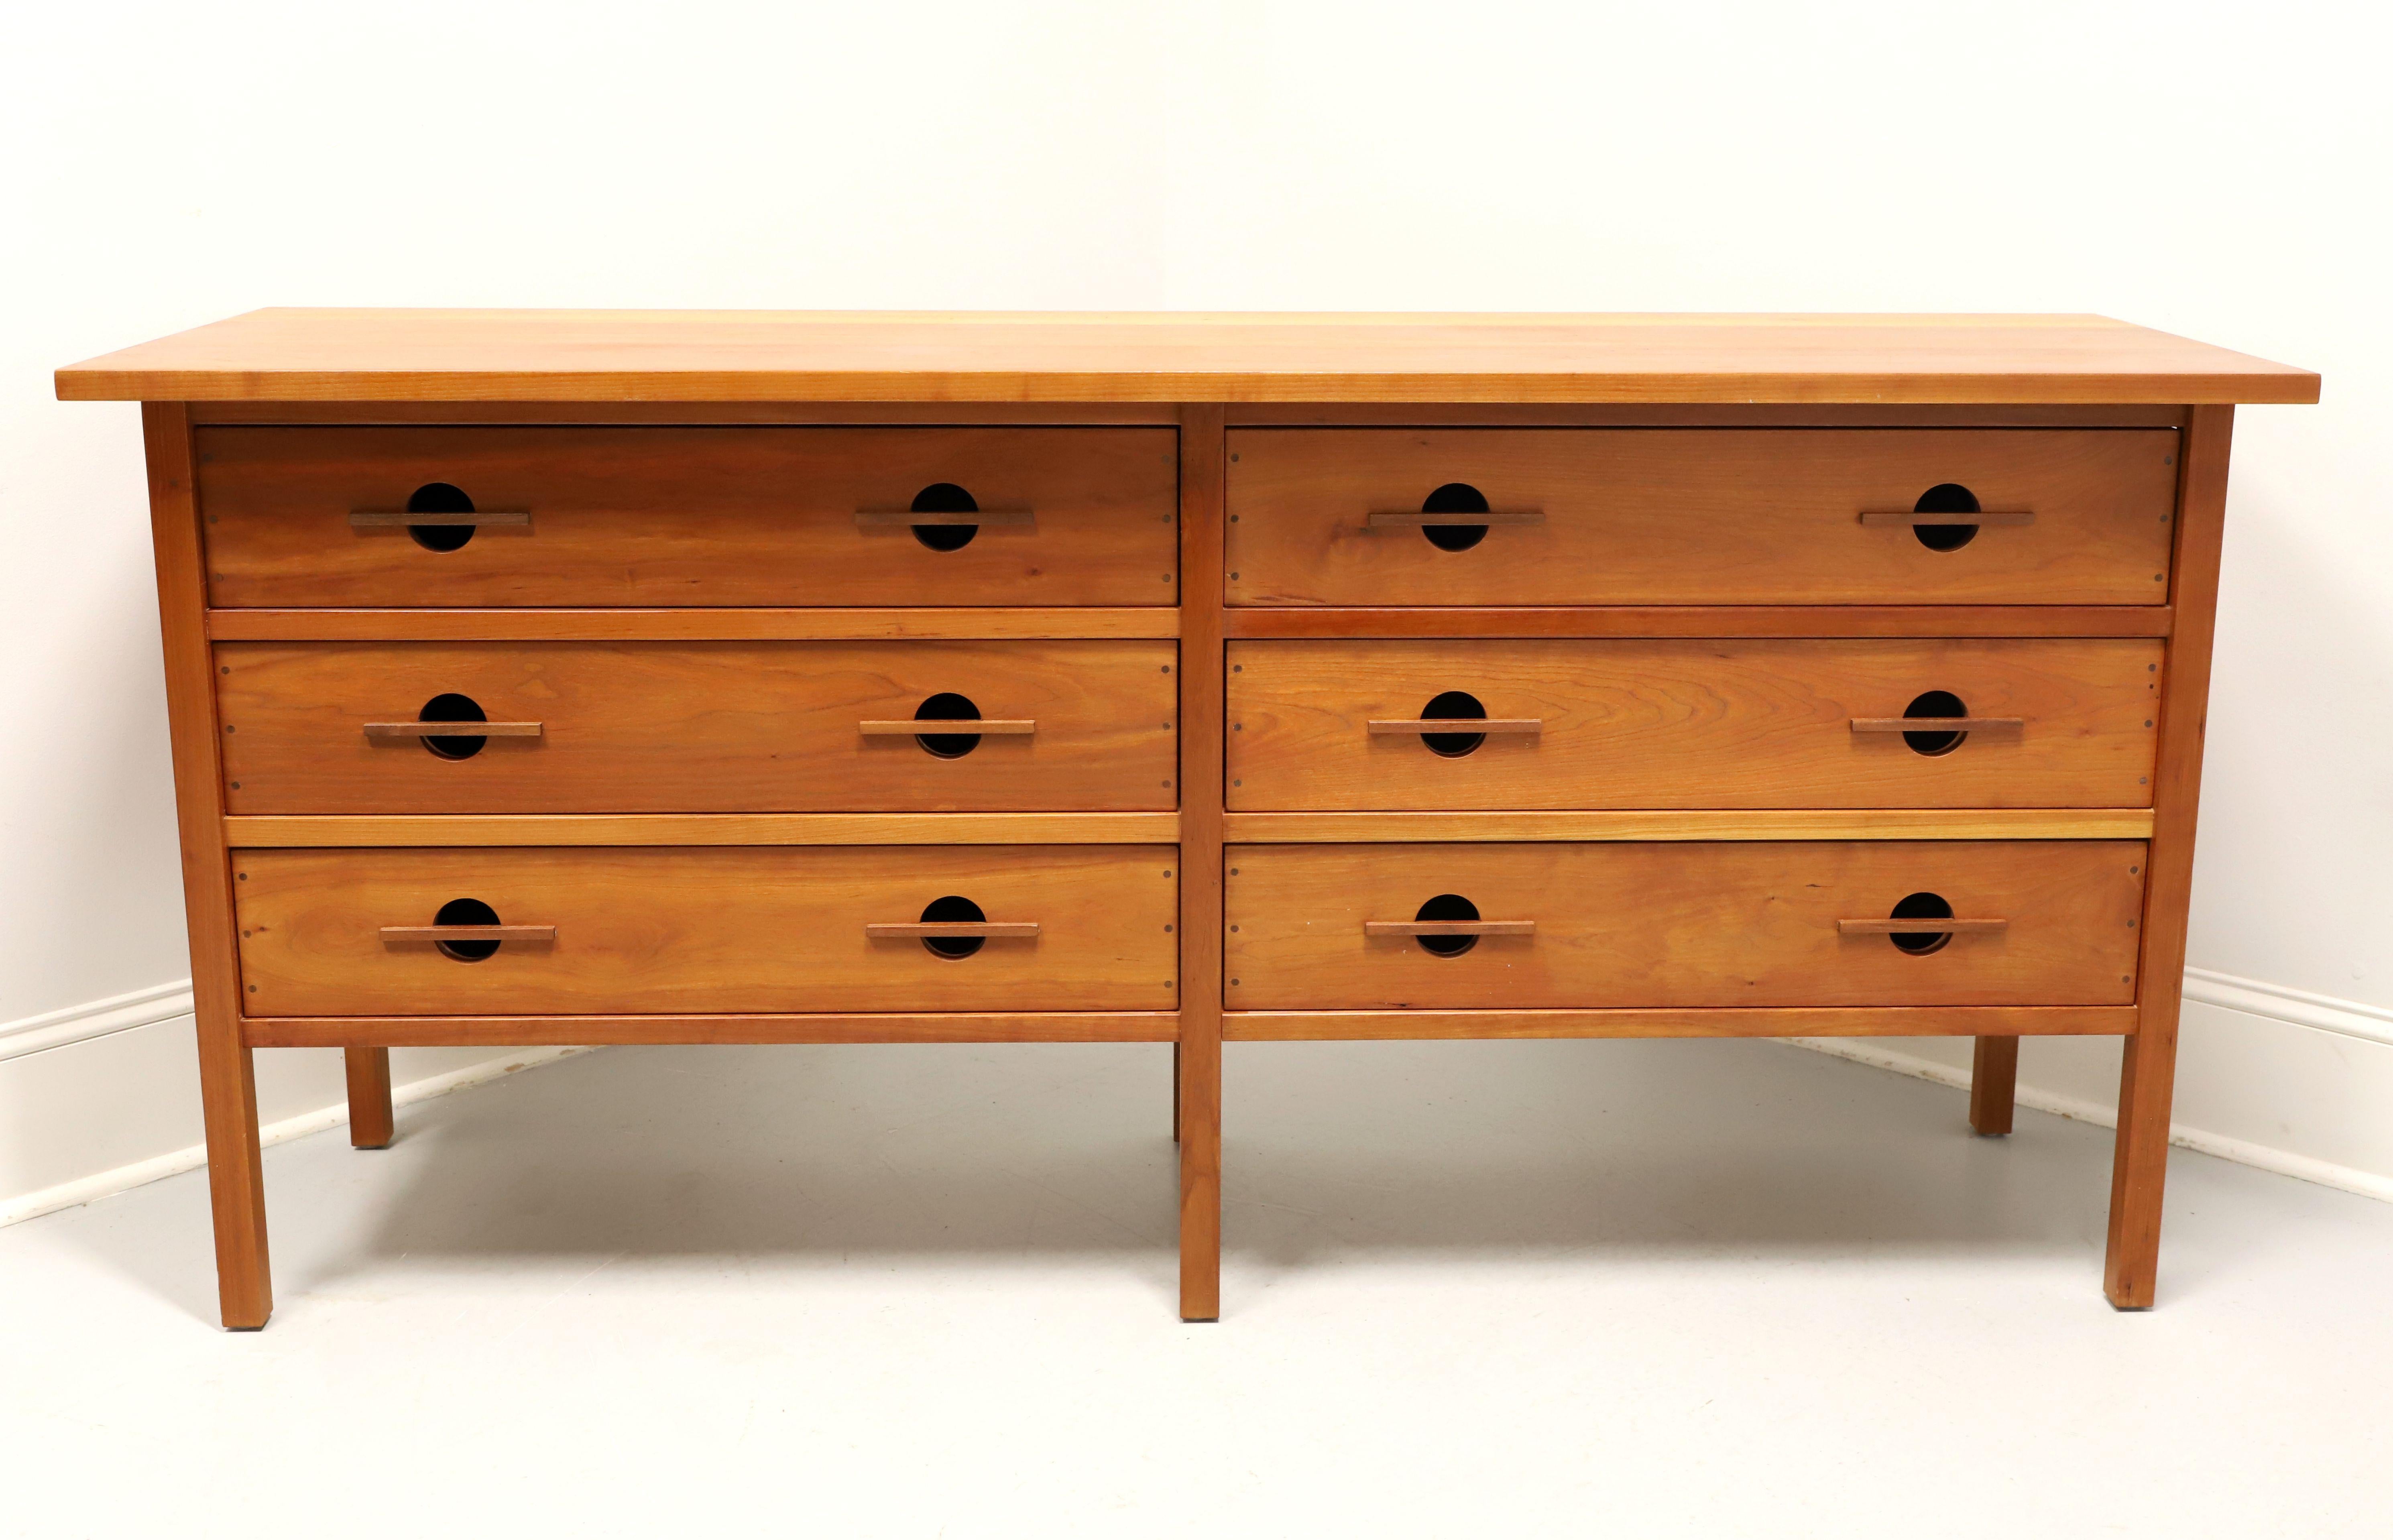 A Mission / Arts & Crafts style double dresser by John Kelly Furniture, the J-29 Longboy, from their J1 Series. Solid black cherry with black walnut peg detailing to drawers, square edge overhanging top, signature exposed structural frame, and